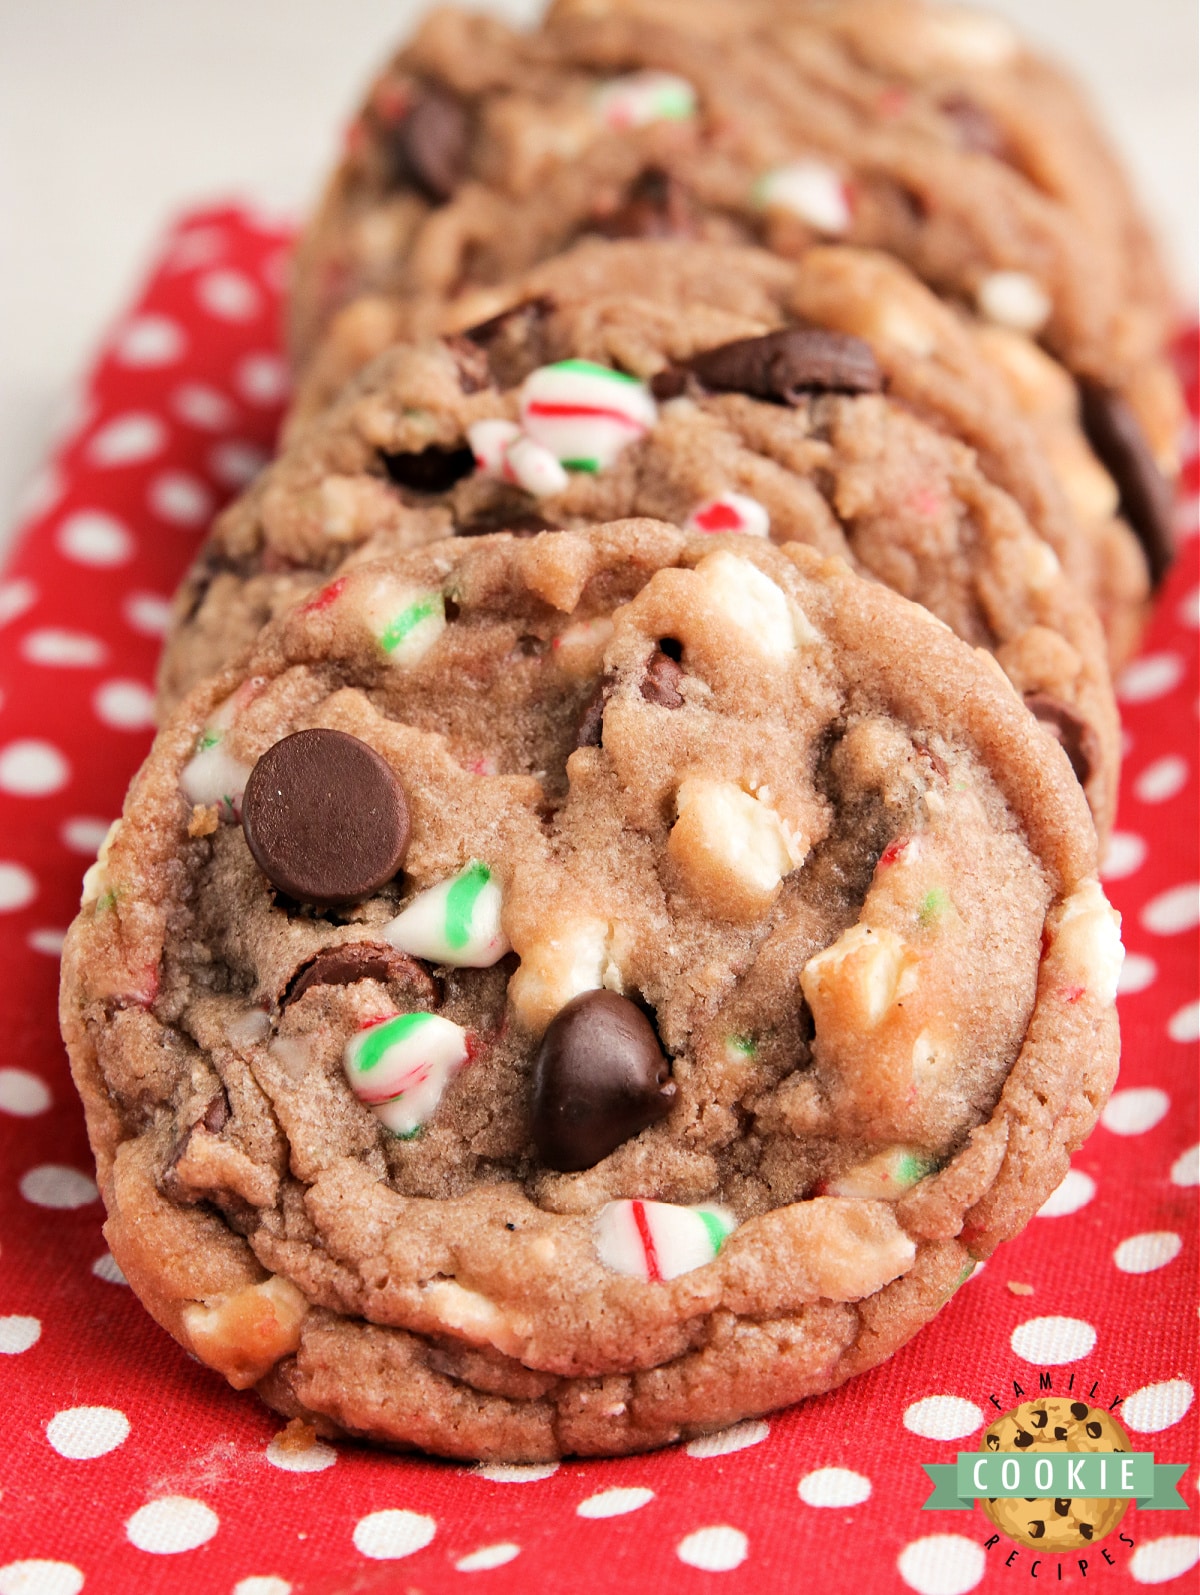 Cookies with hot cocoa mix, chocolate chips and candy canes